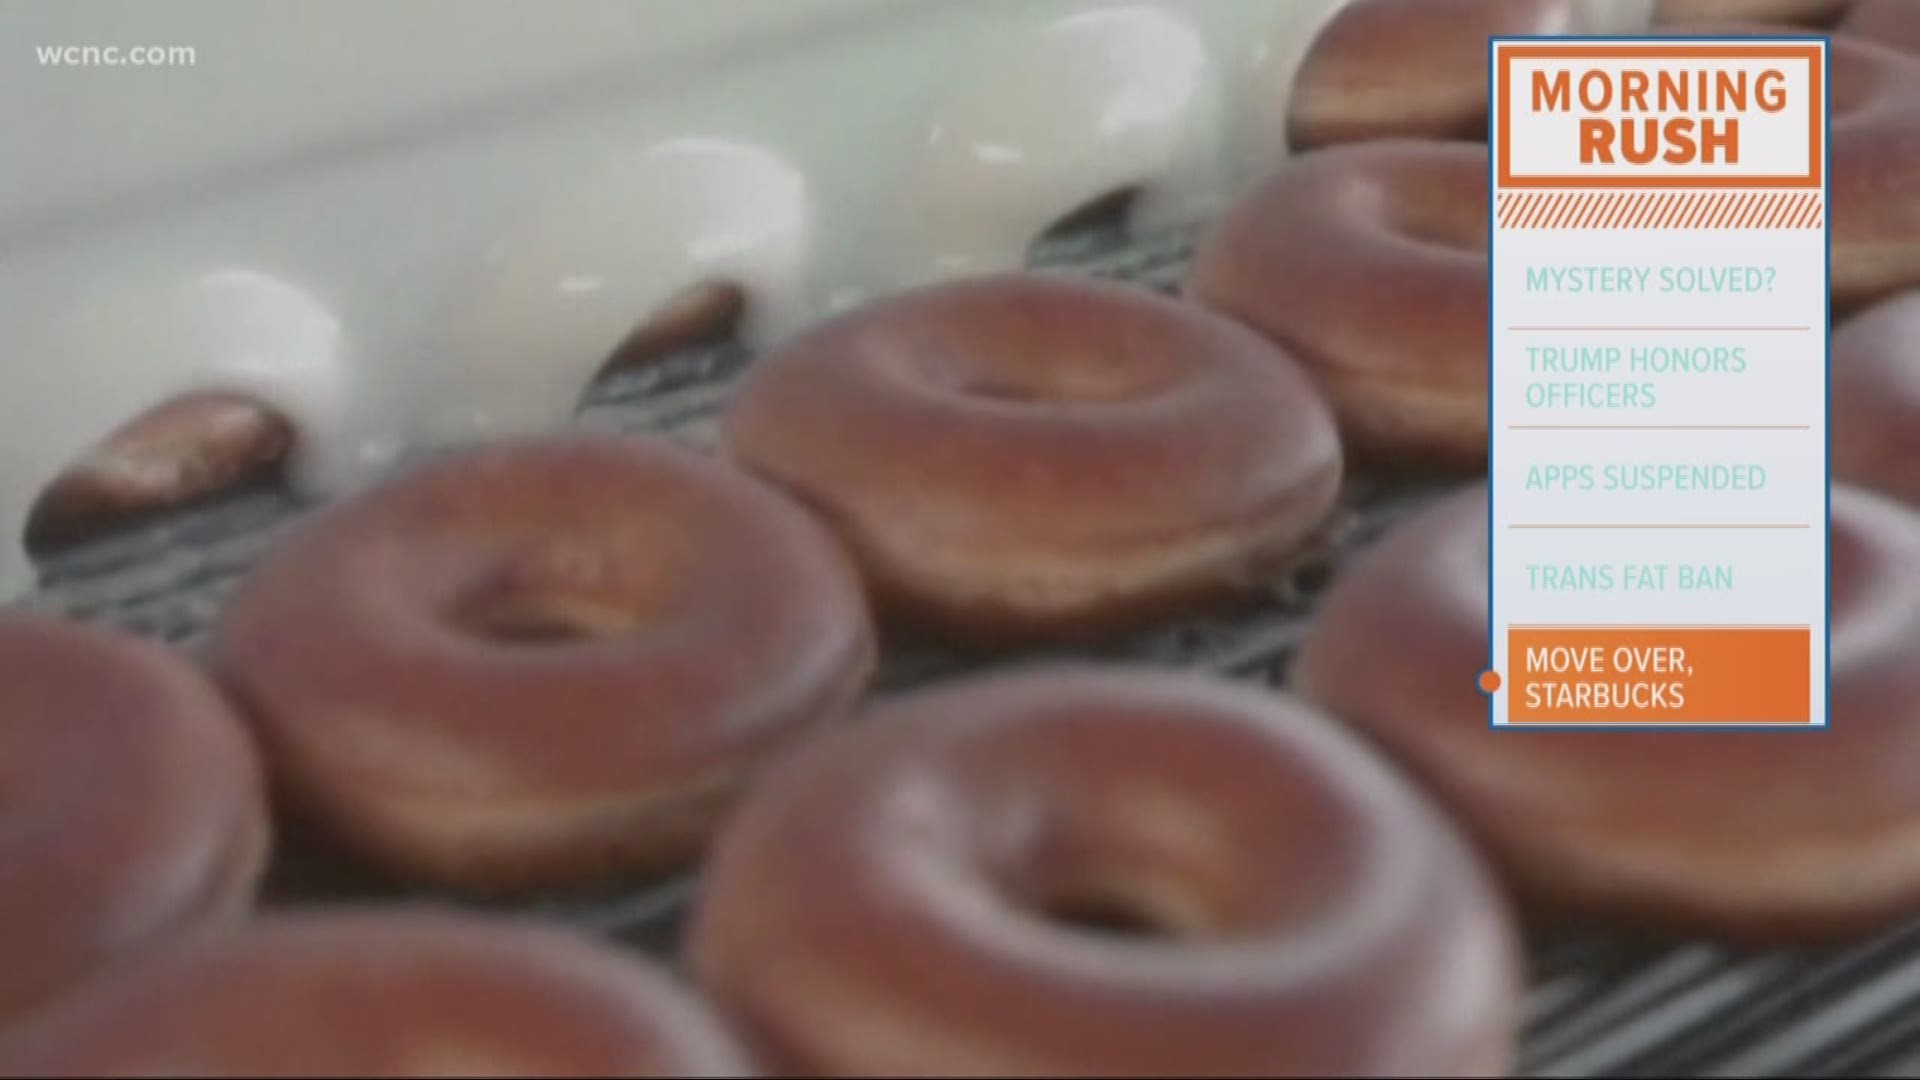 According to a recent poll, Krispy Kreme has the best coffee in America, beating out giants Starbucks and Dunkin Donuts.